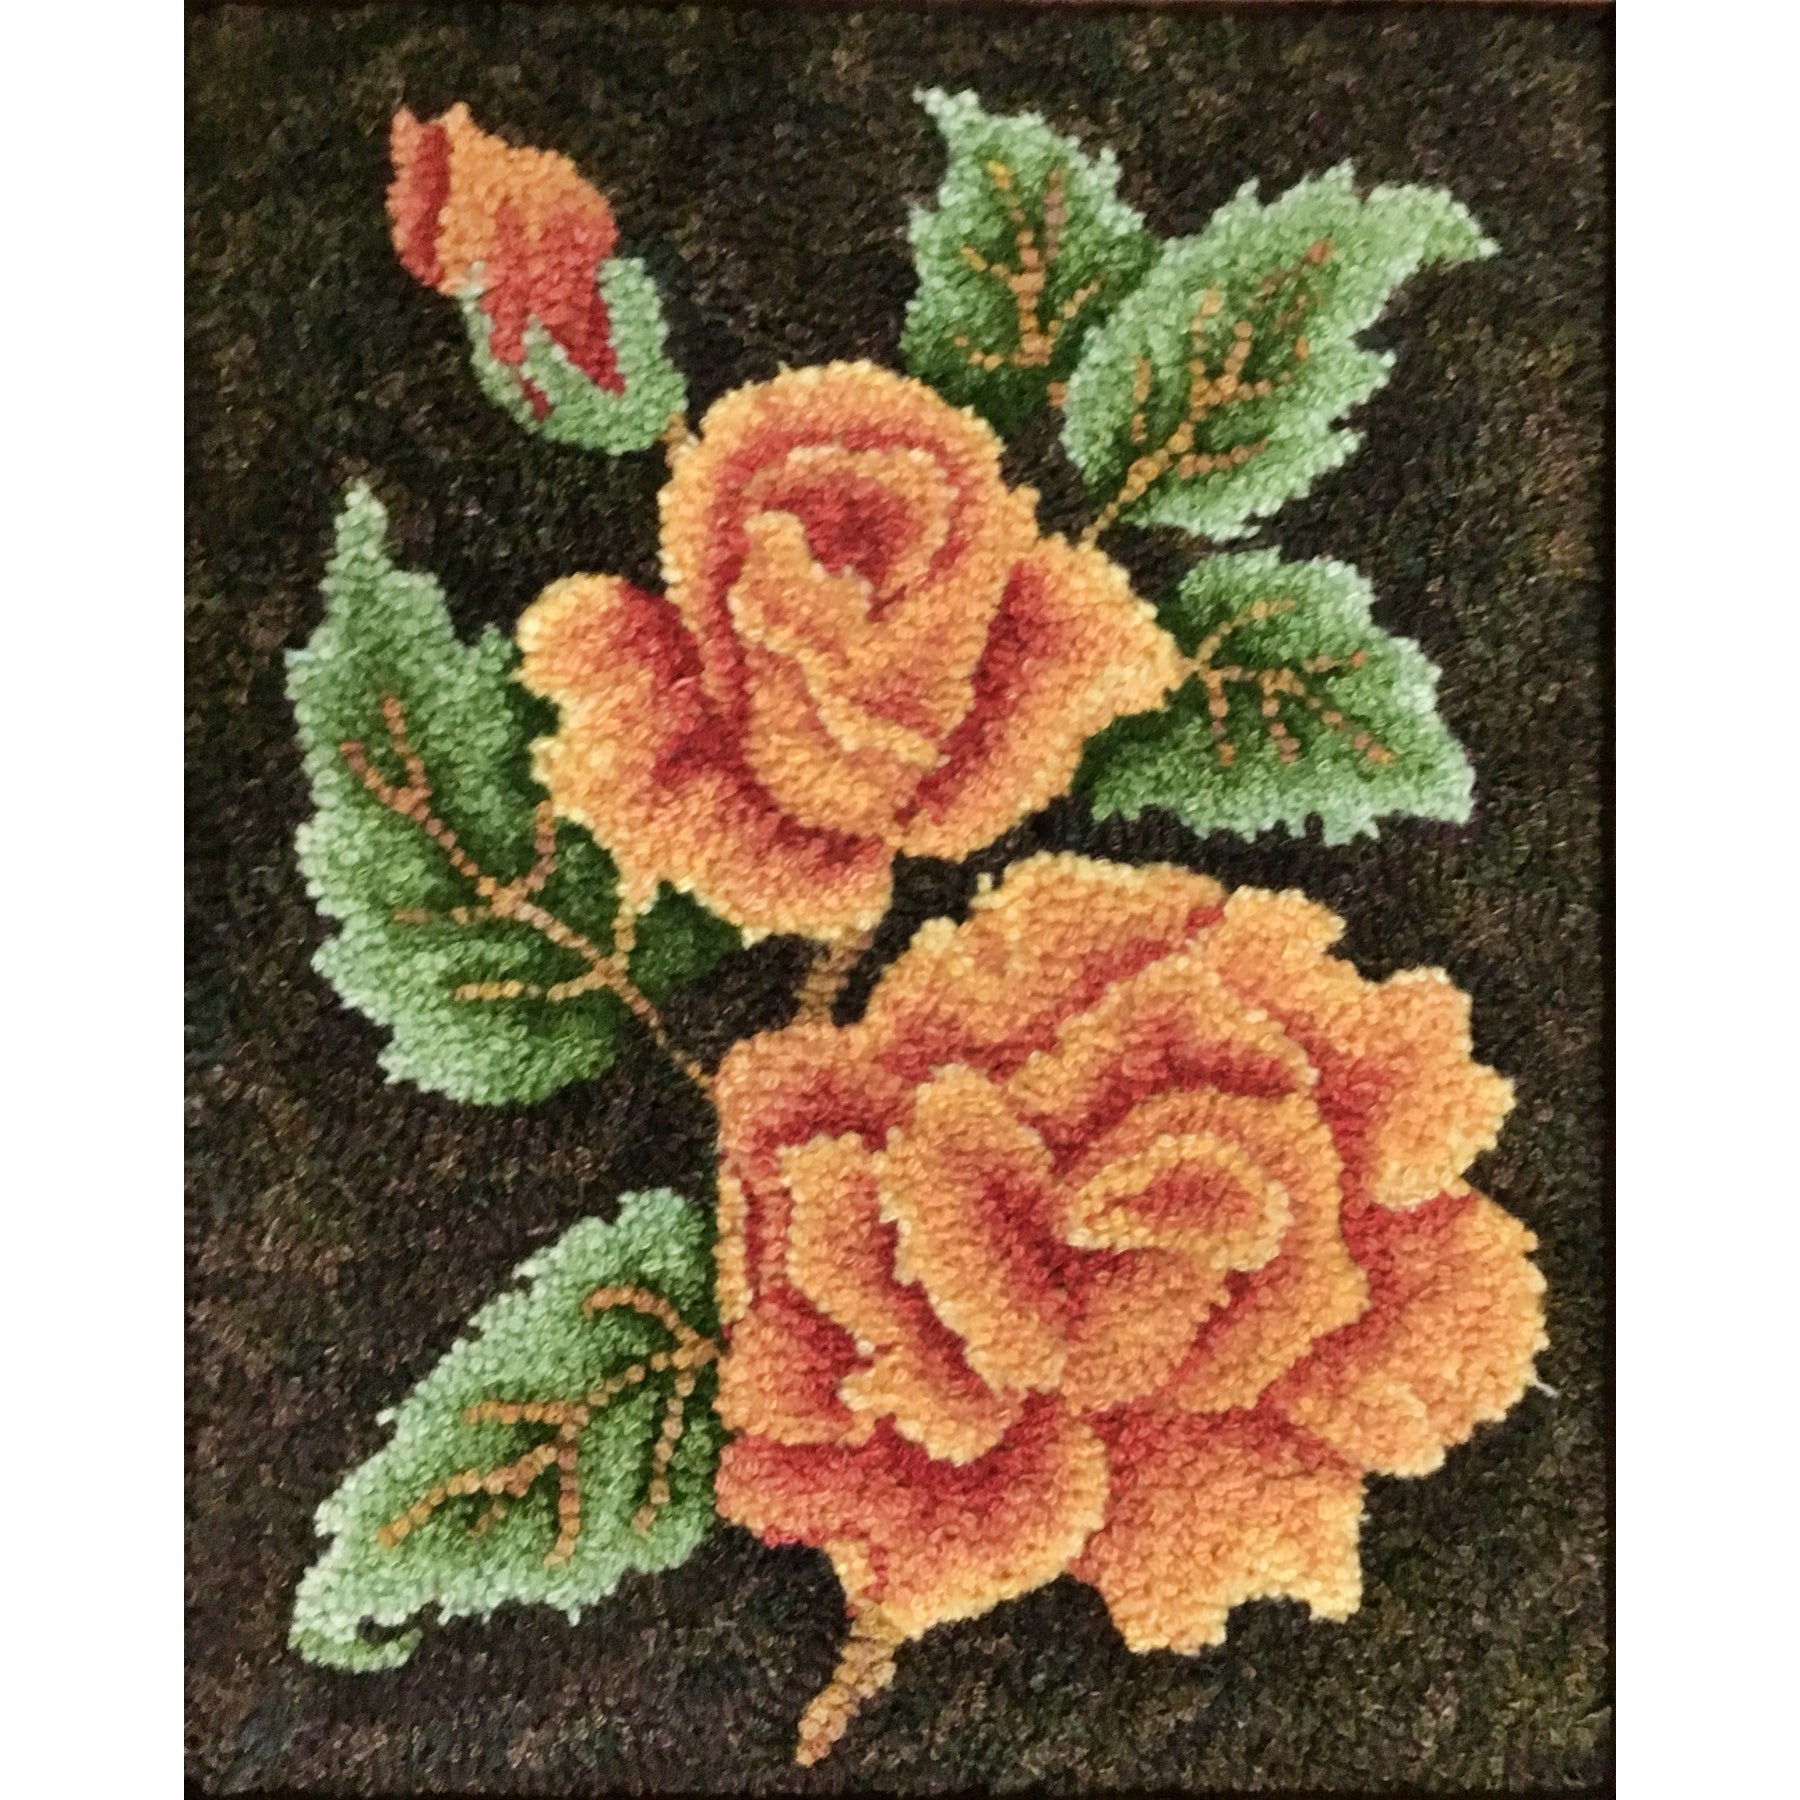 Roses, rug hooked by Beverly Mulcahy